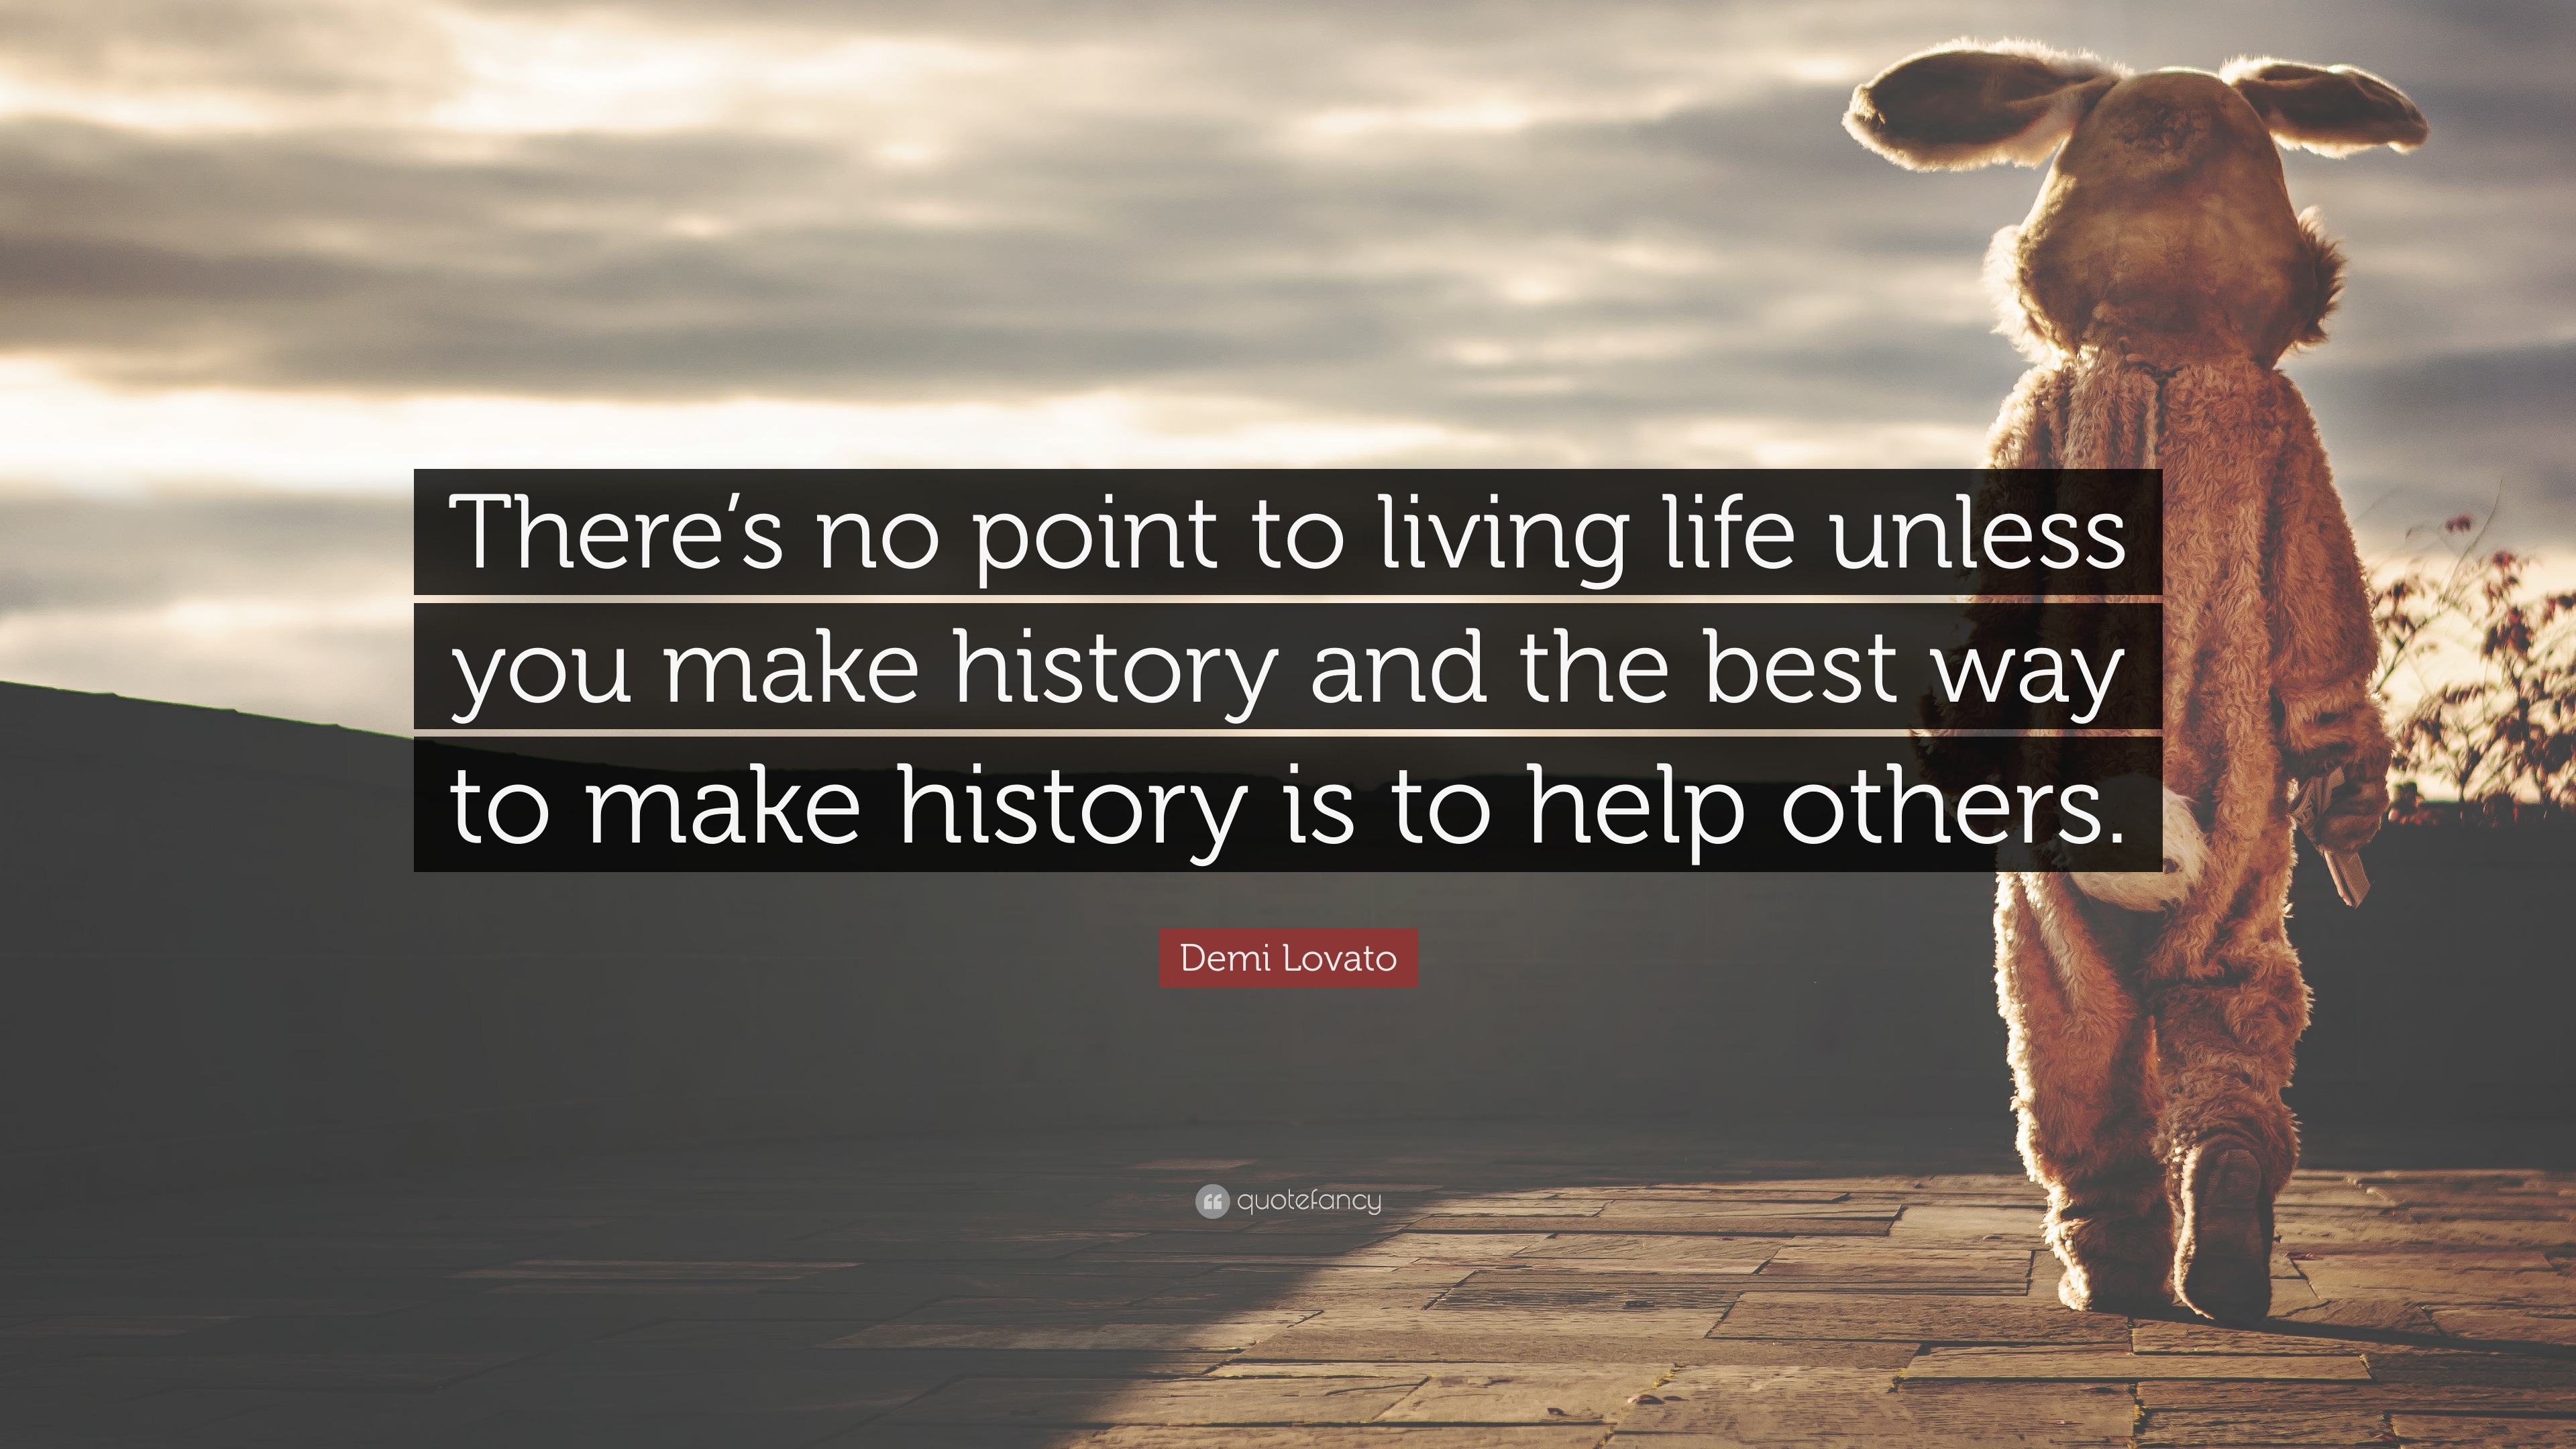 Demi Lovato Quote “There s no point to living life unless you make history and